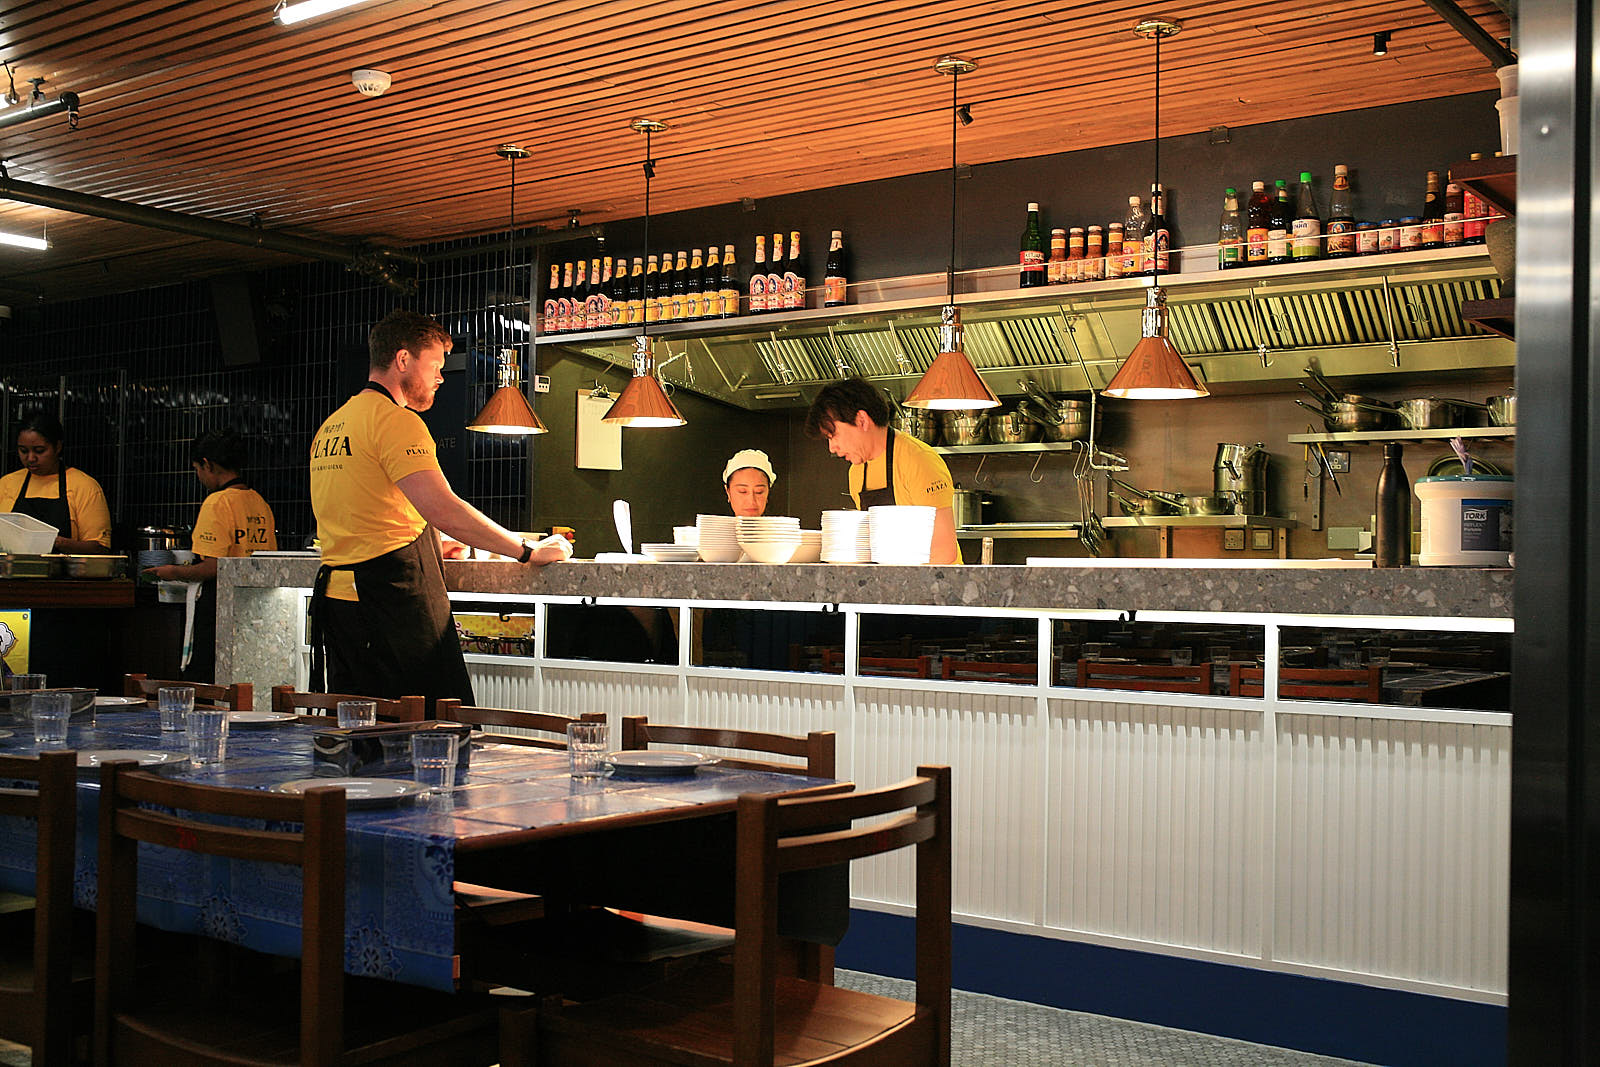 The open kitchen at Plaza, illuminated by strip lighting designed to mimic its inspiring counterparts in Thailand.